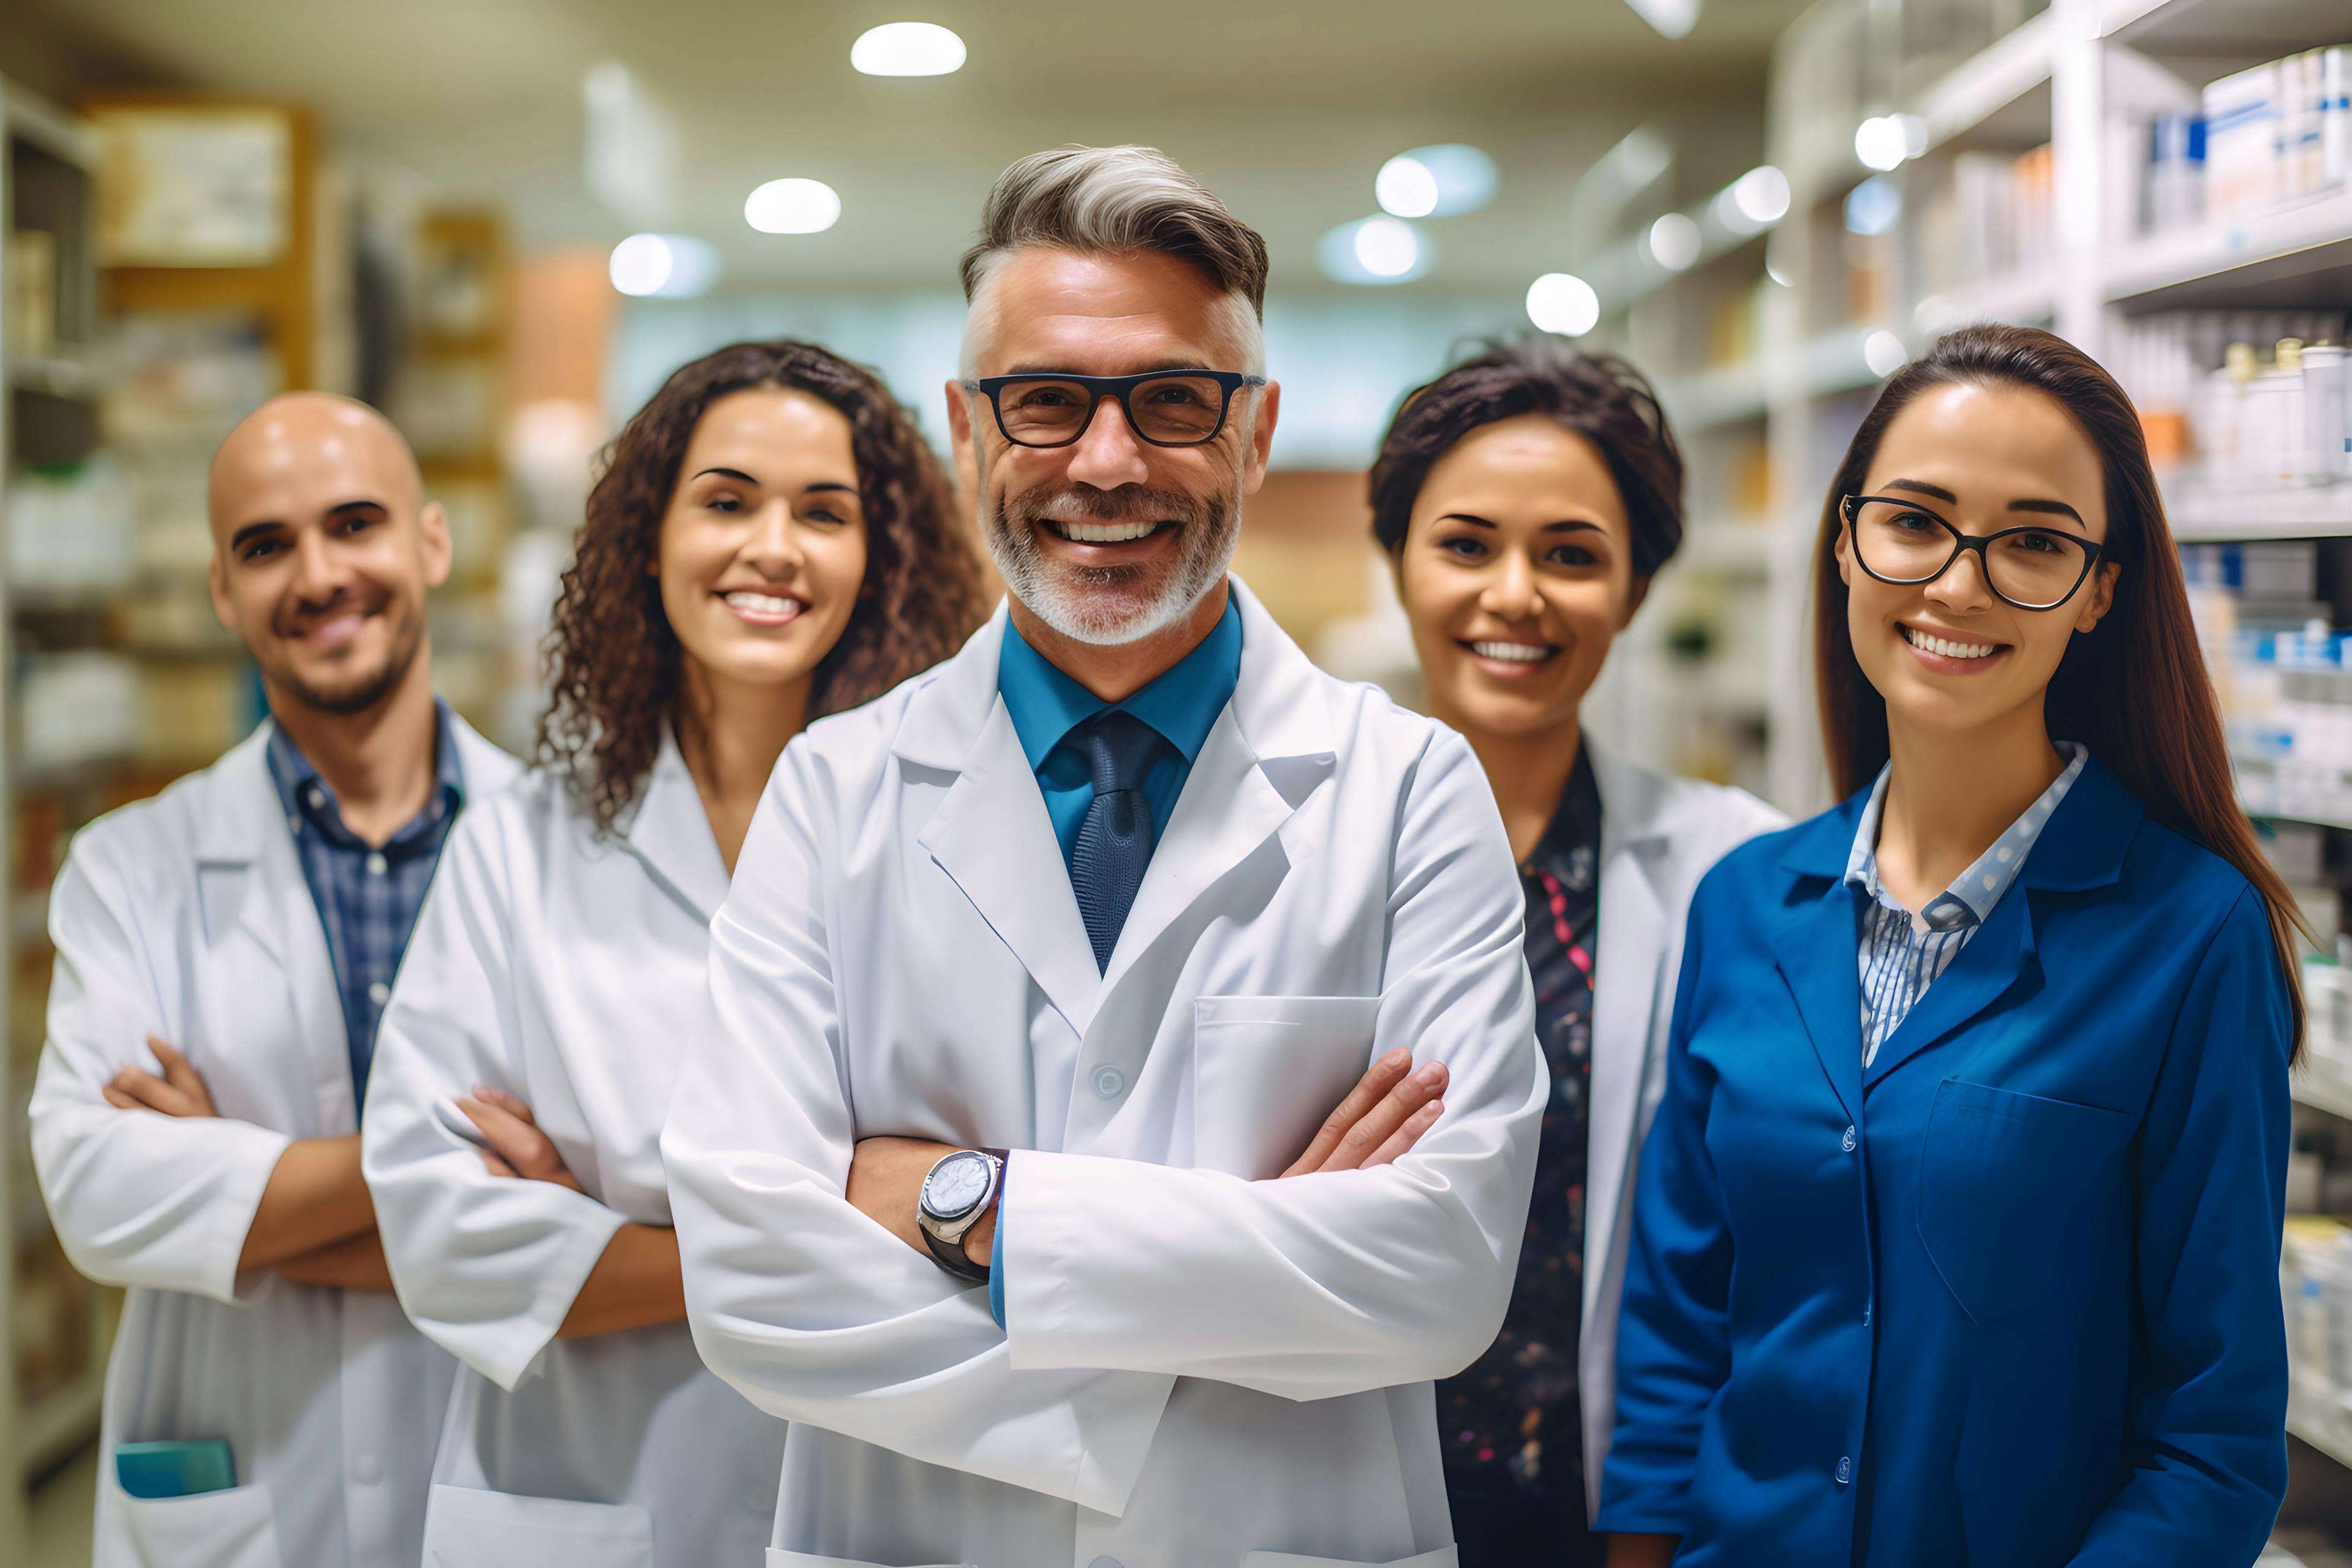 Strategies for Recruiting New Employees and Reducing Turnover in Your Pharmacy